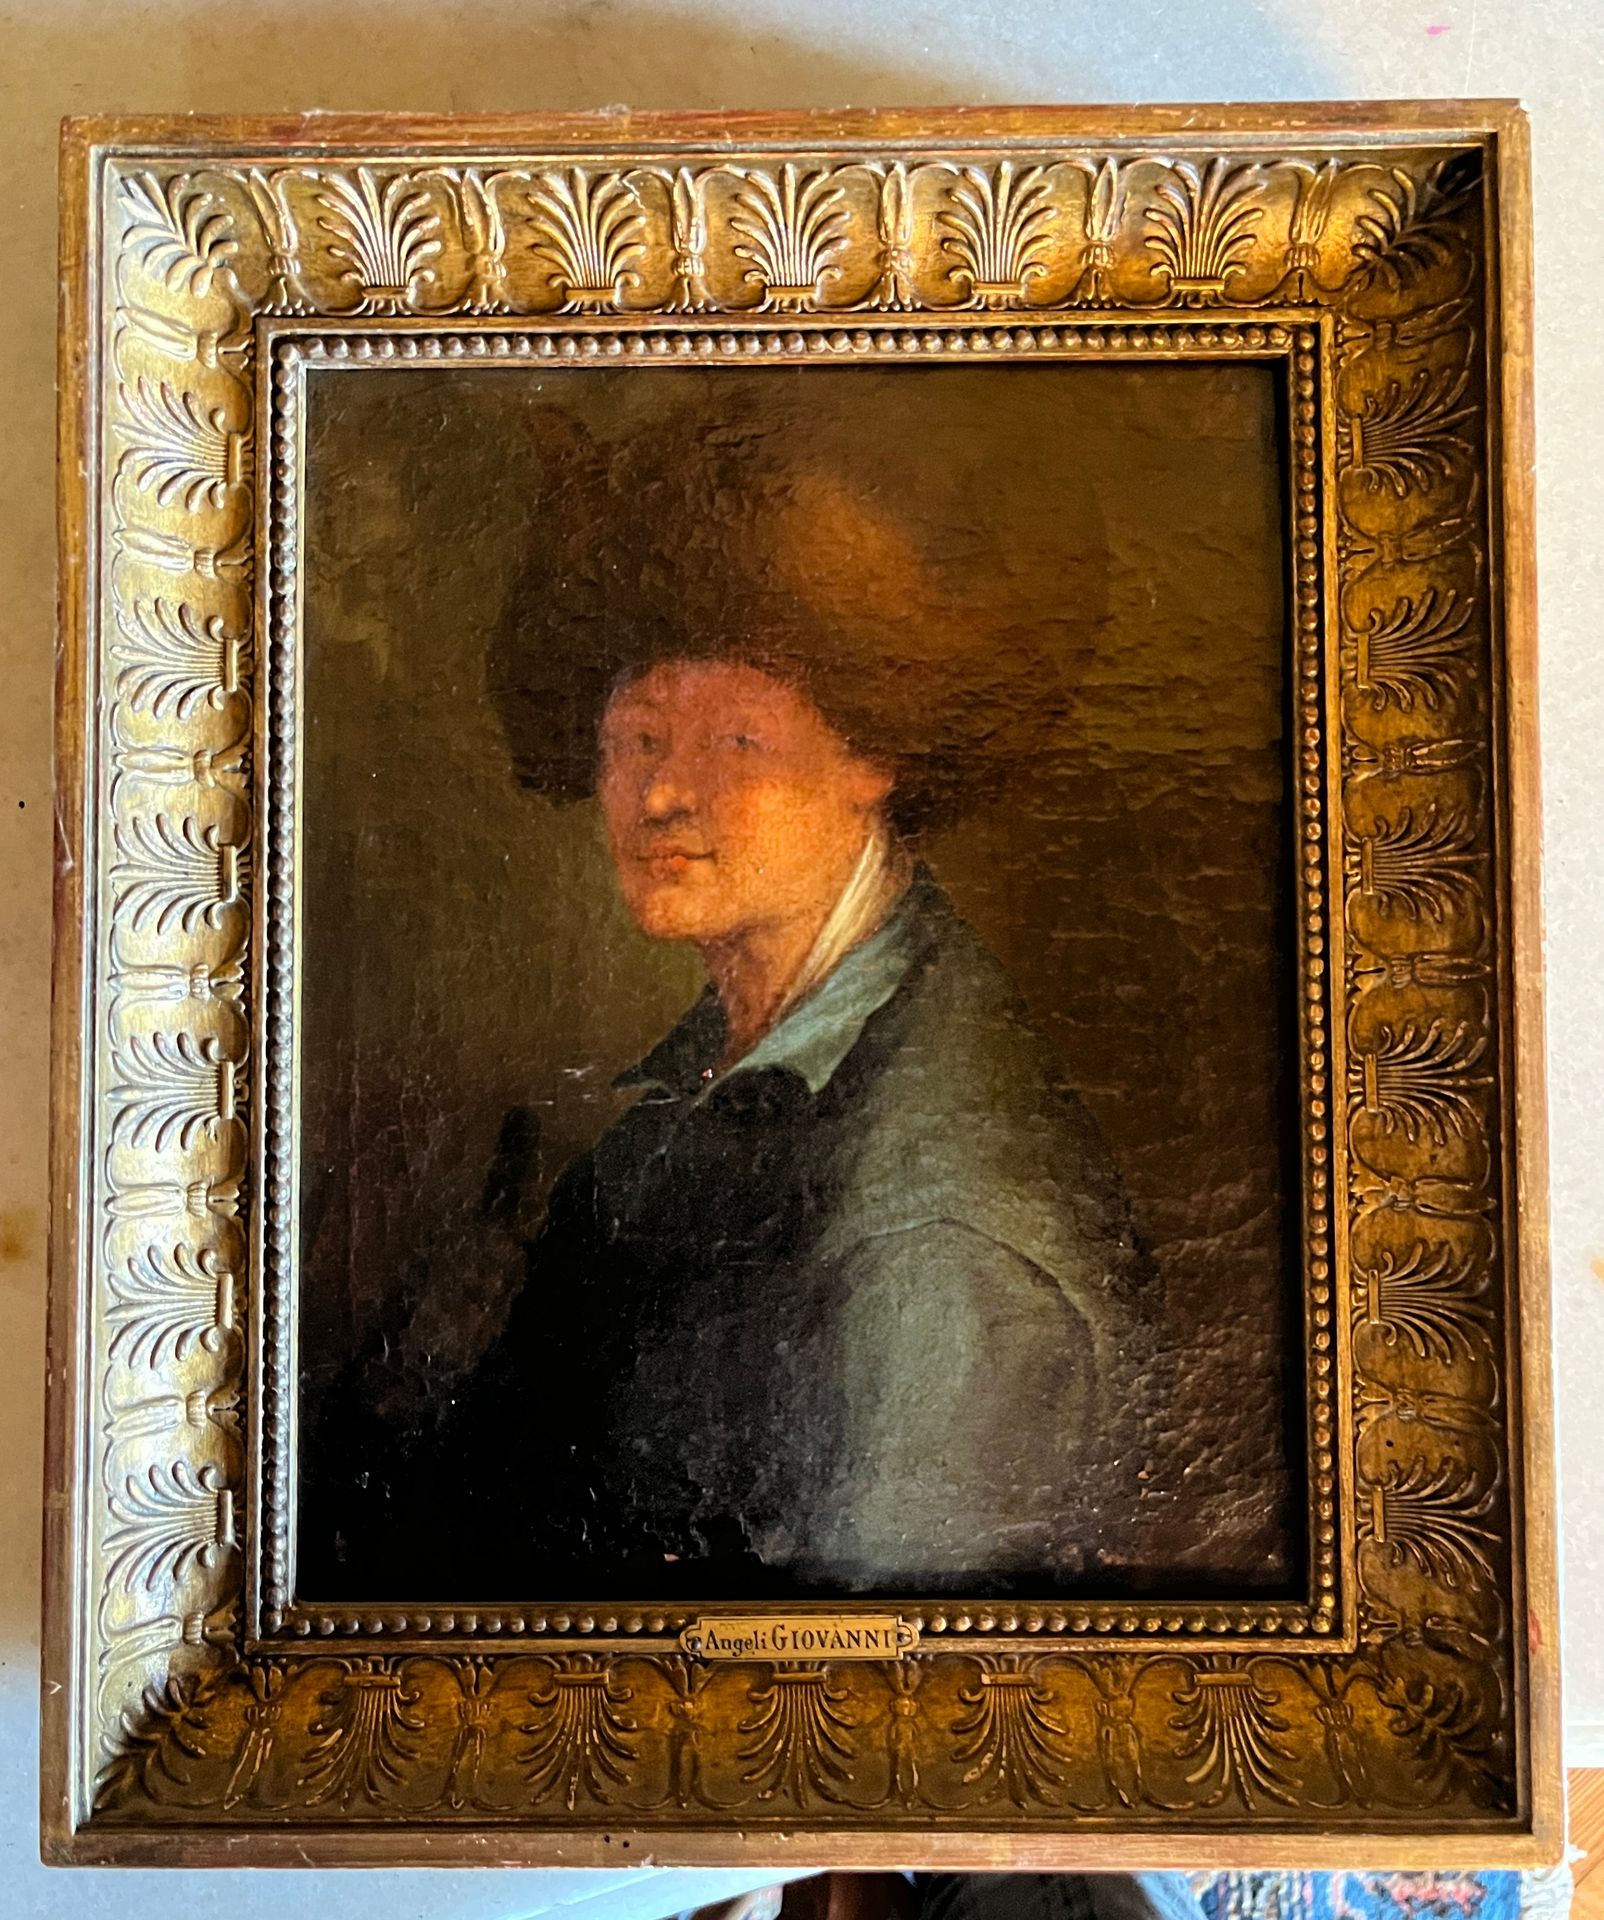 Null 65. Angeli GIOVANNI (?)

Portrait of a man with a hat

Oil on canvas 

Heig&hellip;